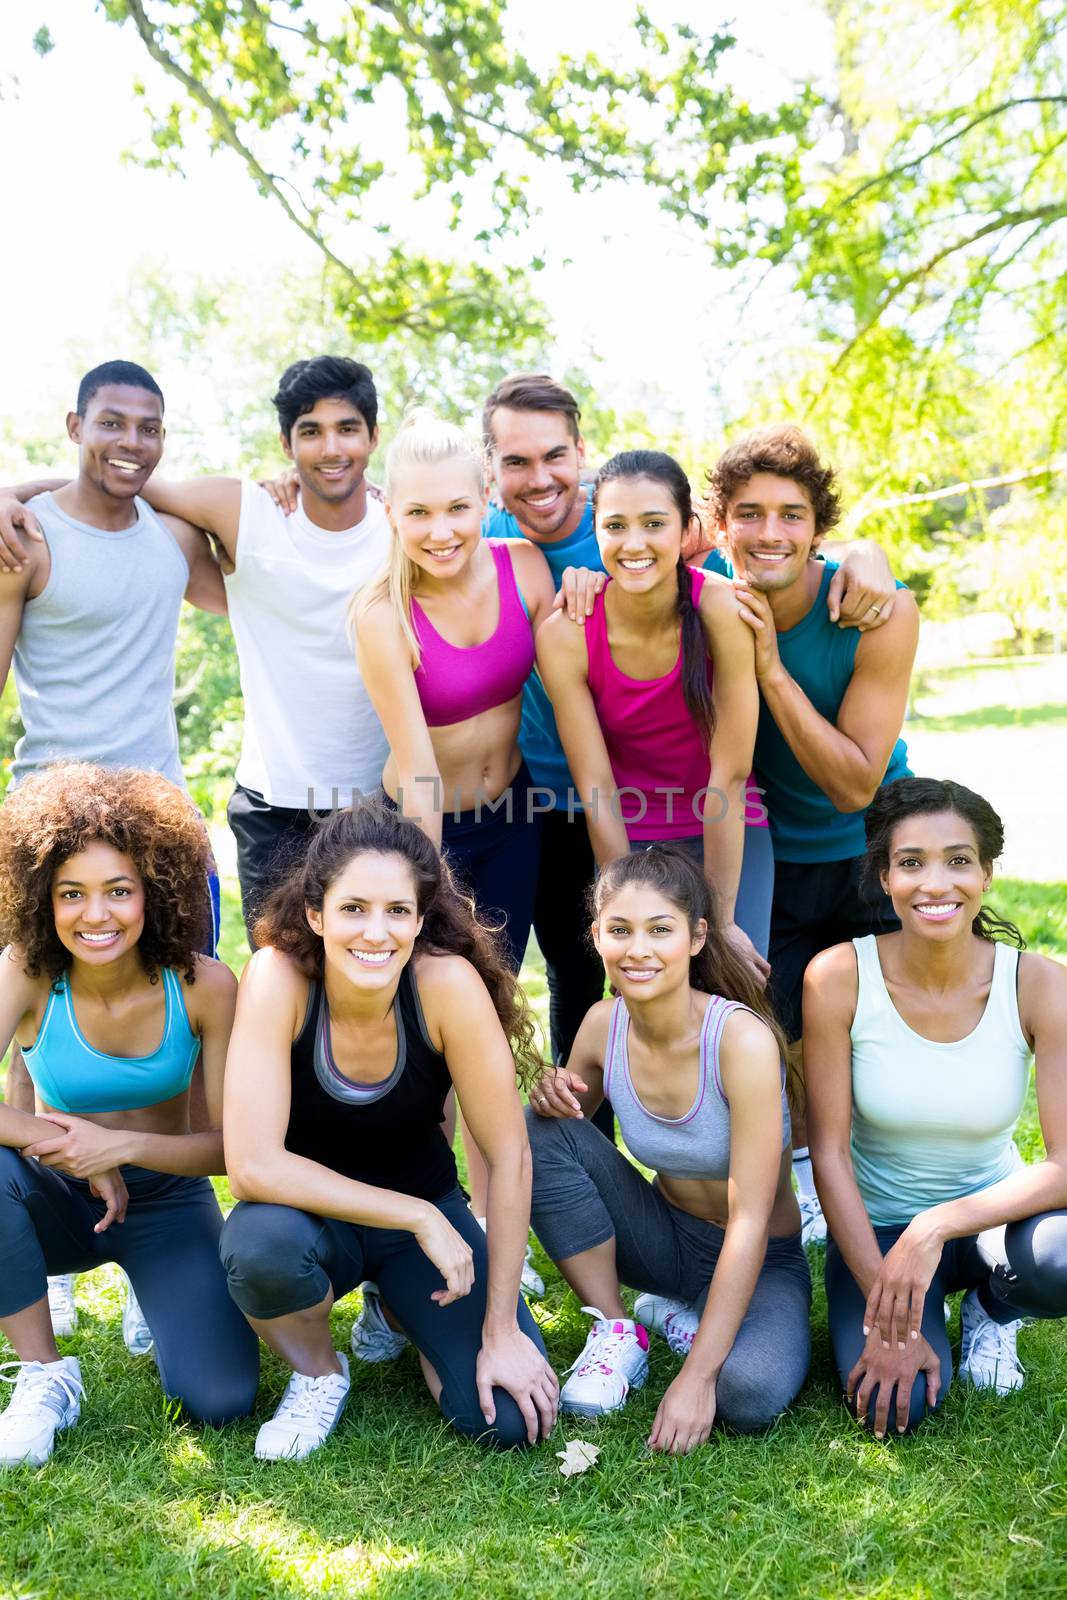 Group portrait of multiethnic friends in sportswear at the park